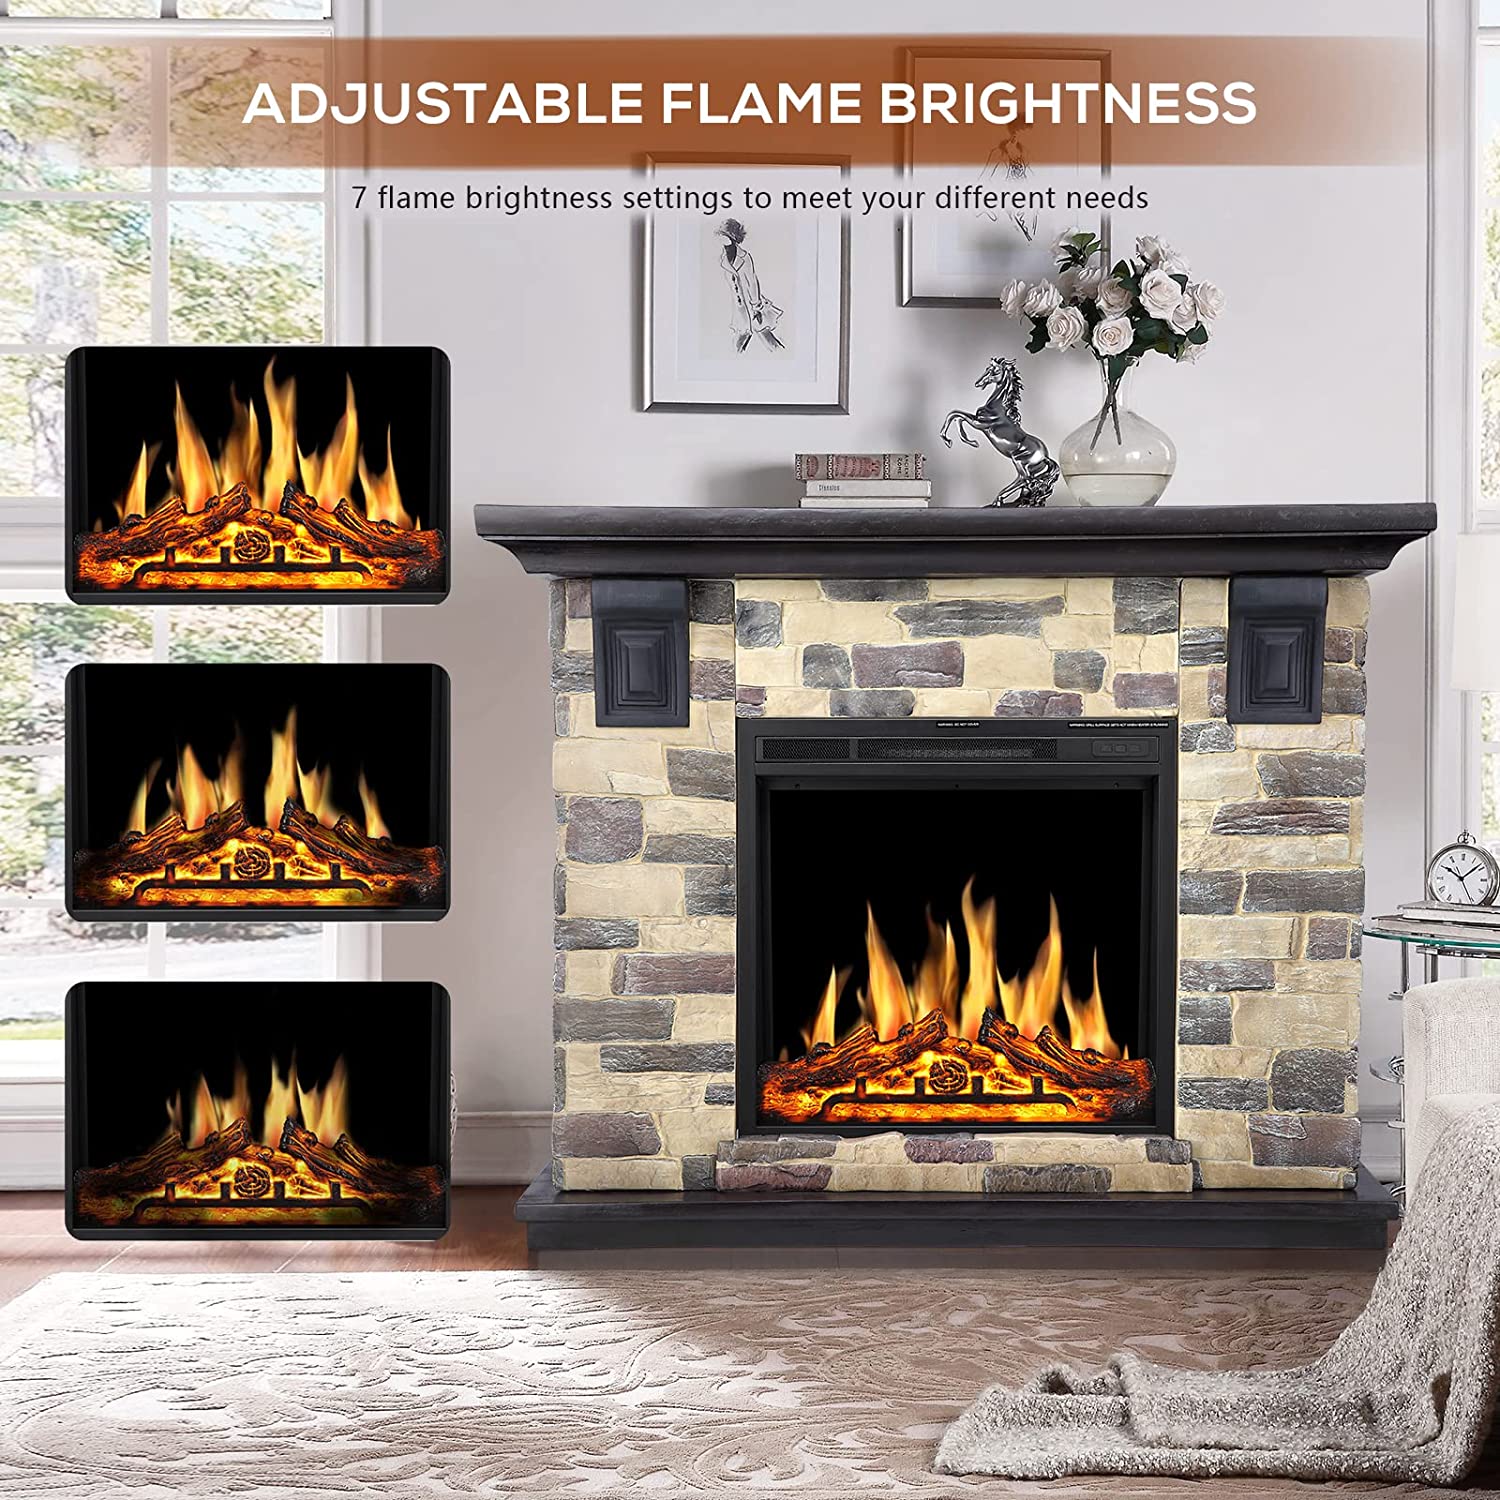 R.W.FLAME Electric Fireplace Mantel Package, 50 inch Freestanding Stone Fireplace Heater TV Stand with Remote Control